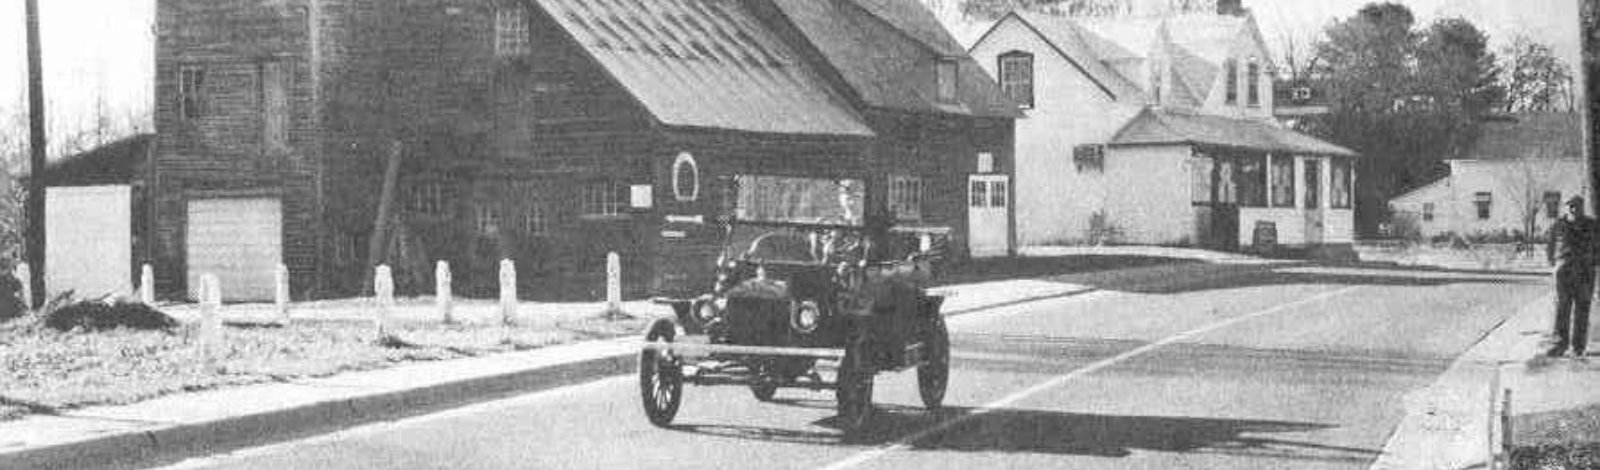 blacksmith shop and car in early 1900s